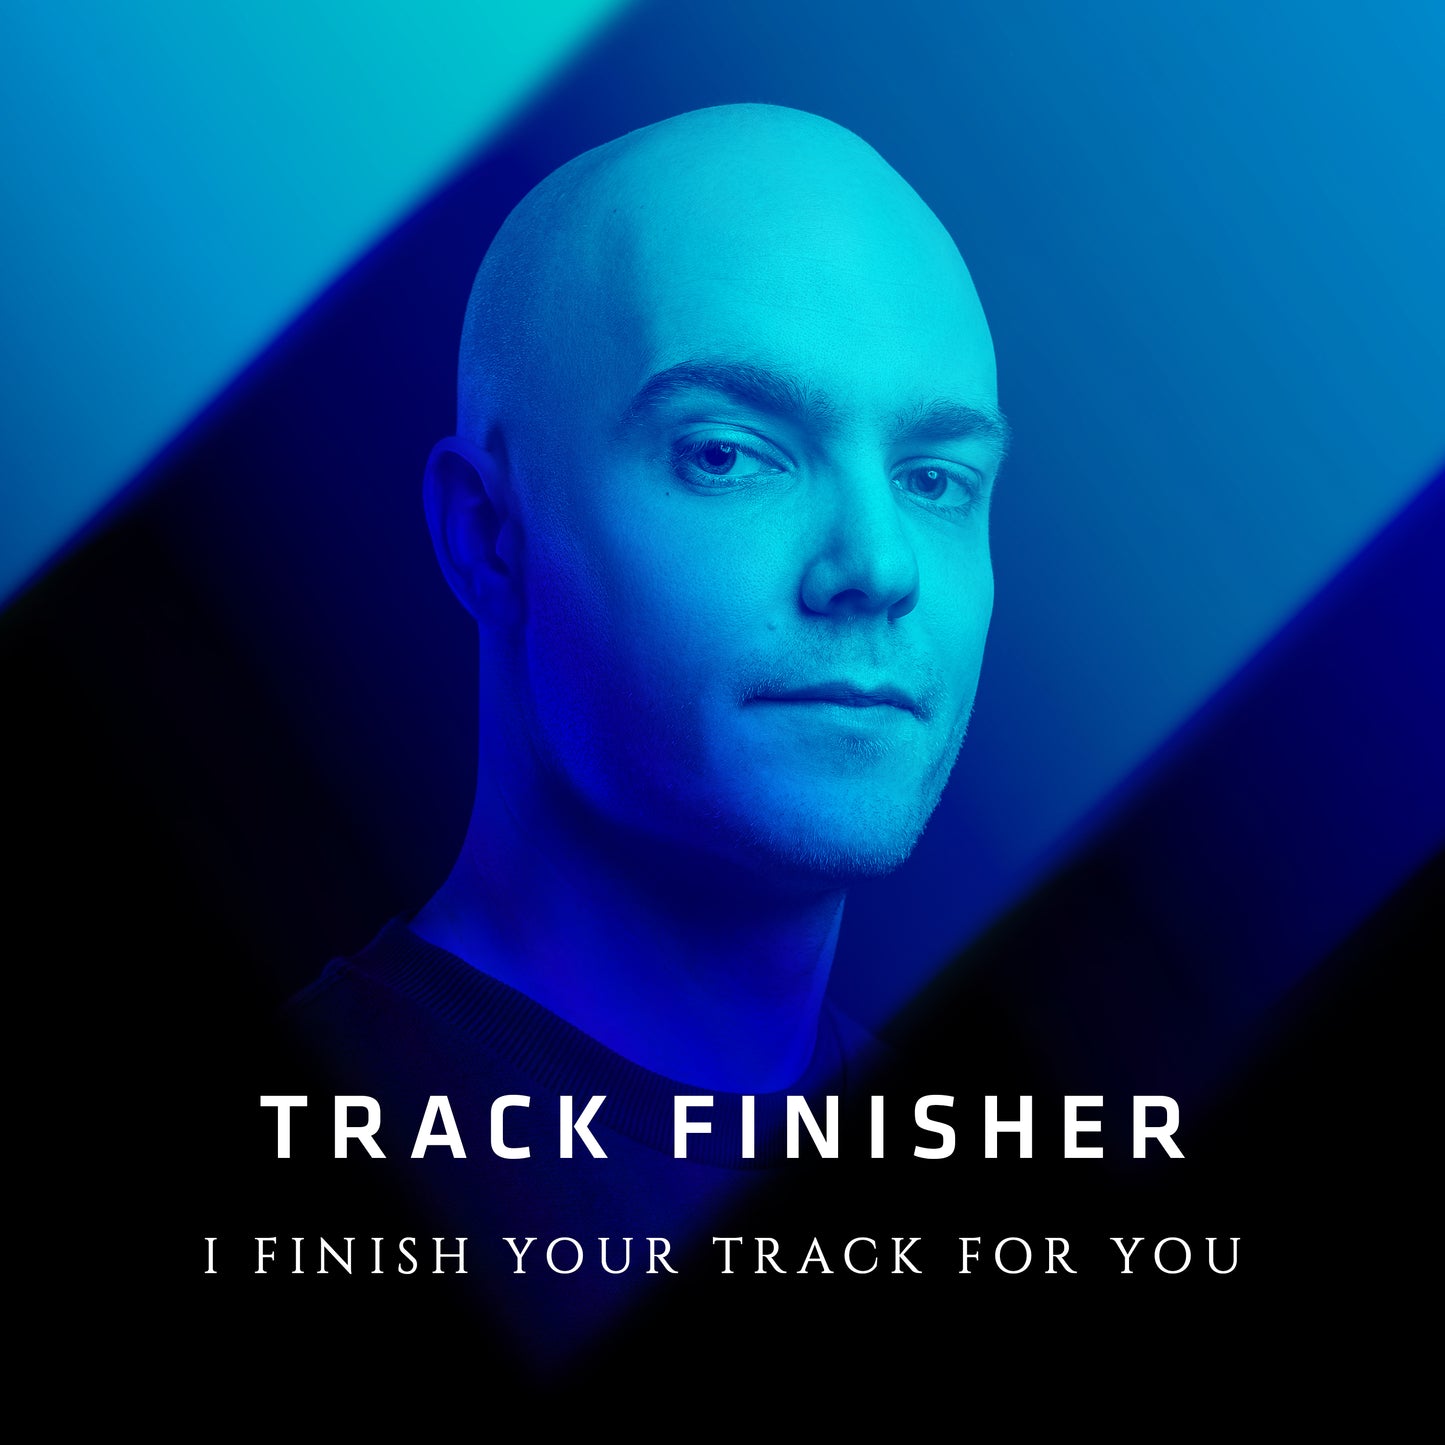 Track finisher by MYST